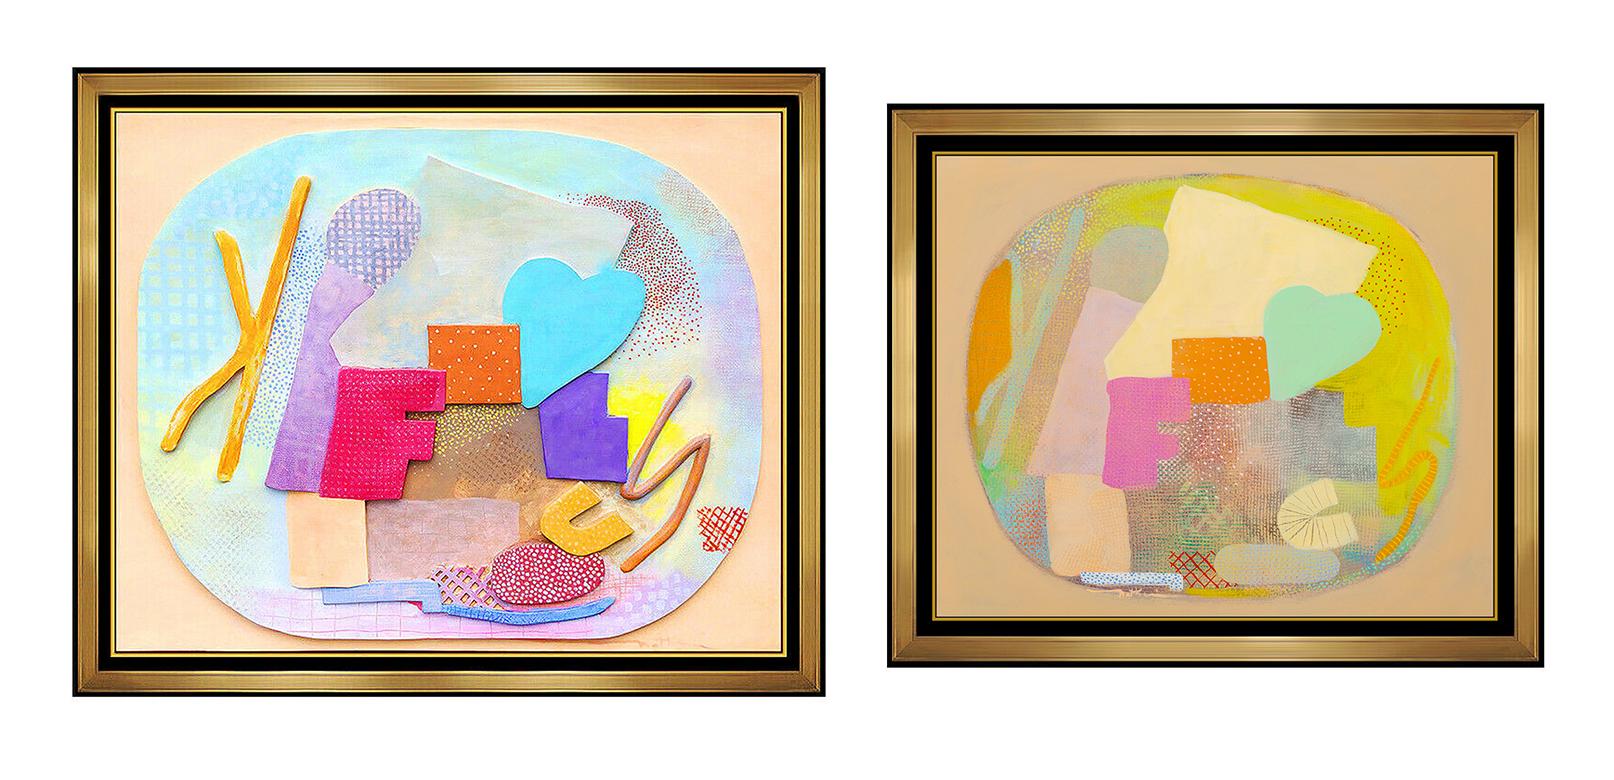 Robert Natkin Authentic, Large and Entirely Original Hand Painted Relief Sculpture and Acrylic Painting, which was a Study for the Sculpture, both Professionally Custom Framed and listed together with the Submit Best Offer option

Accepting Offers